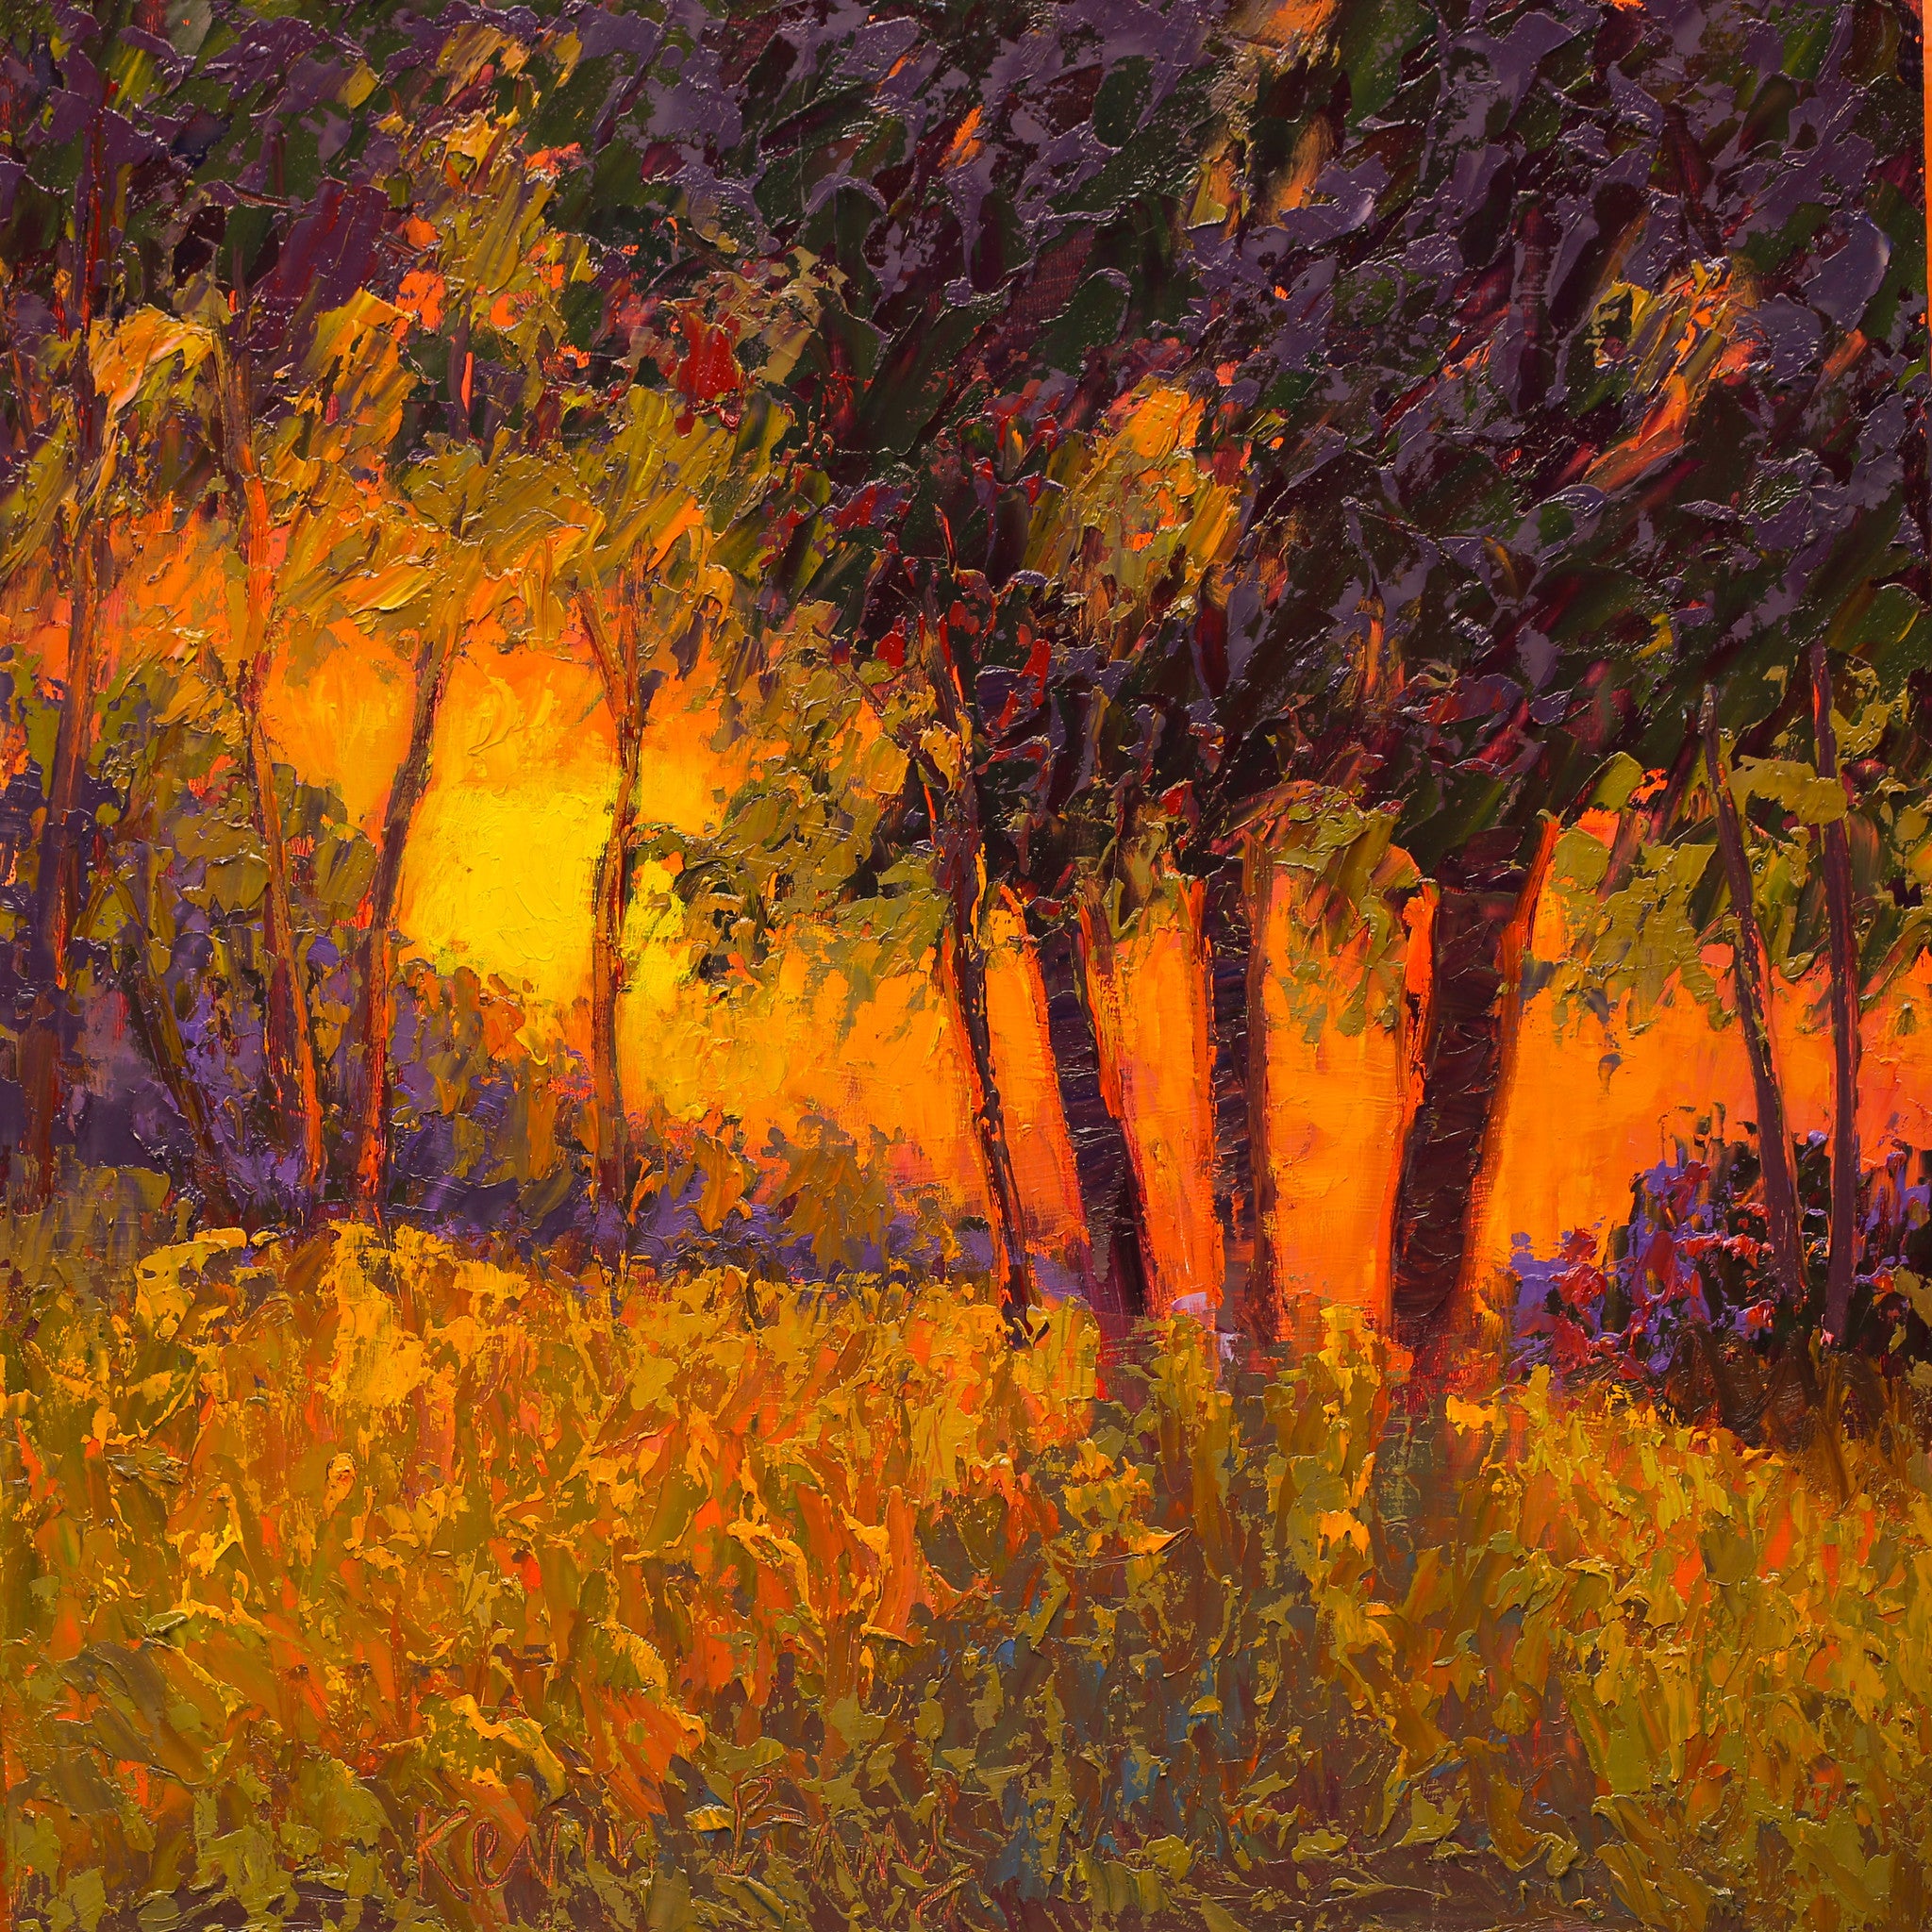 "Autumn Sunset"  Kevin Liang 2019  Original oil on board with frame 18" x 18"